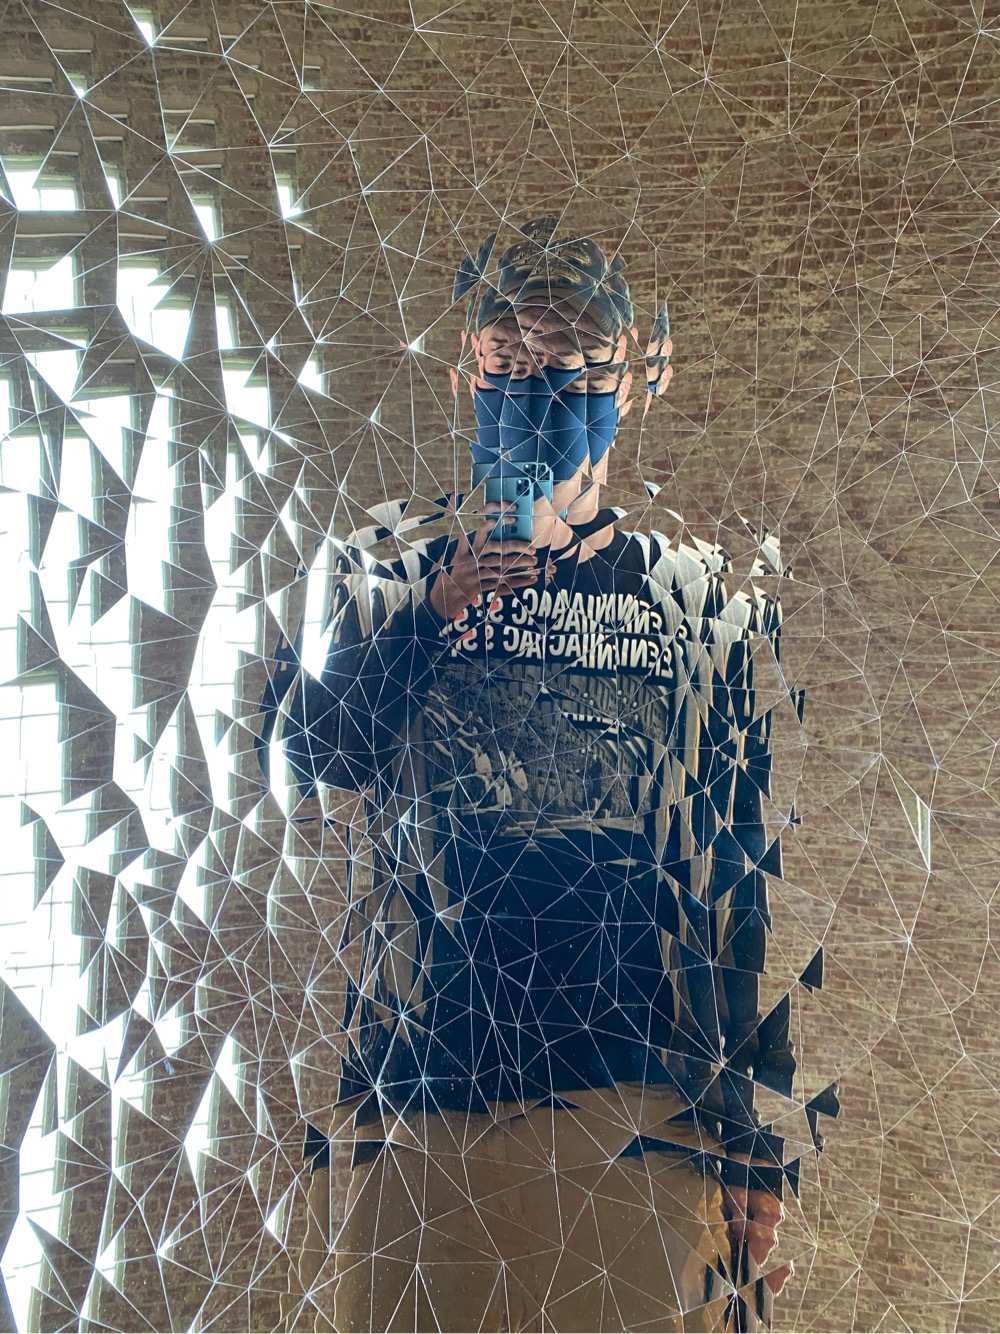 Jason Kottke reflected in a fractured mirror